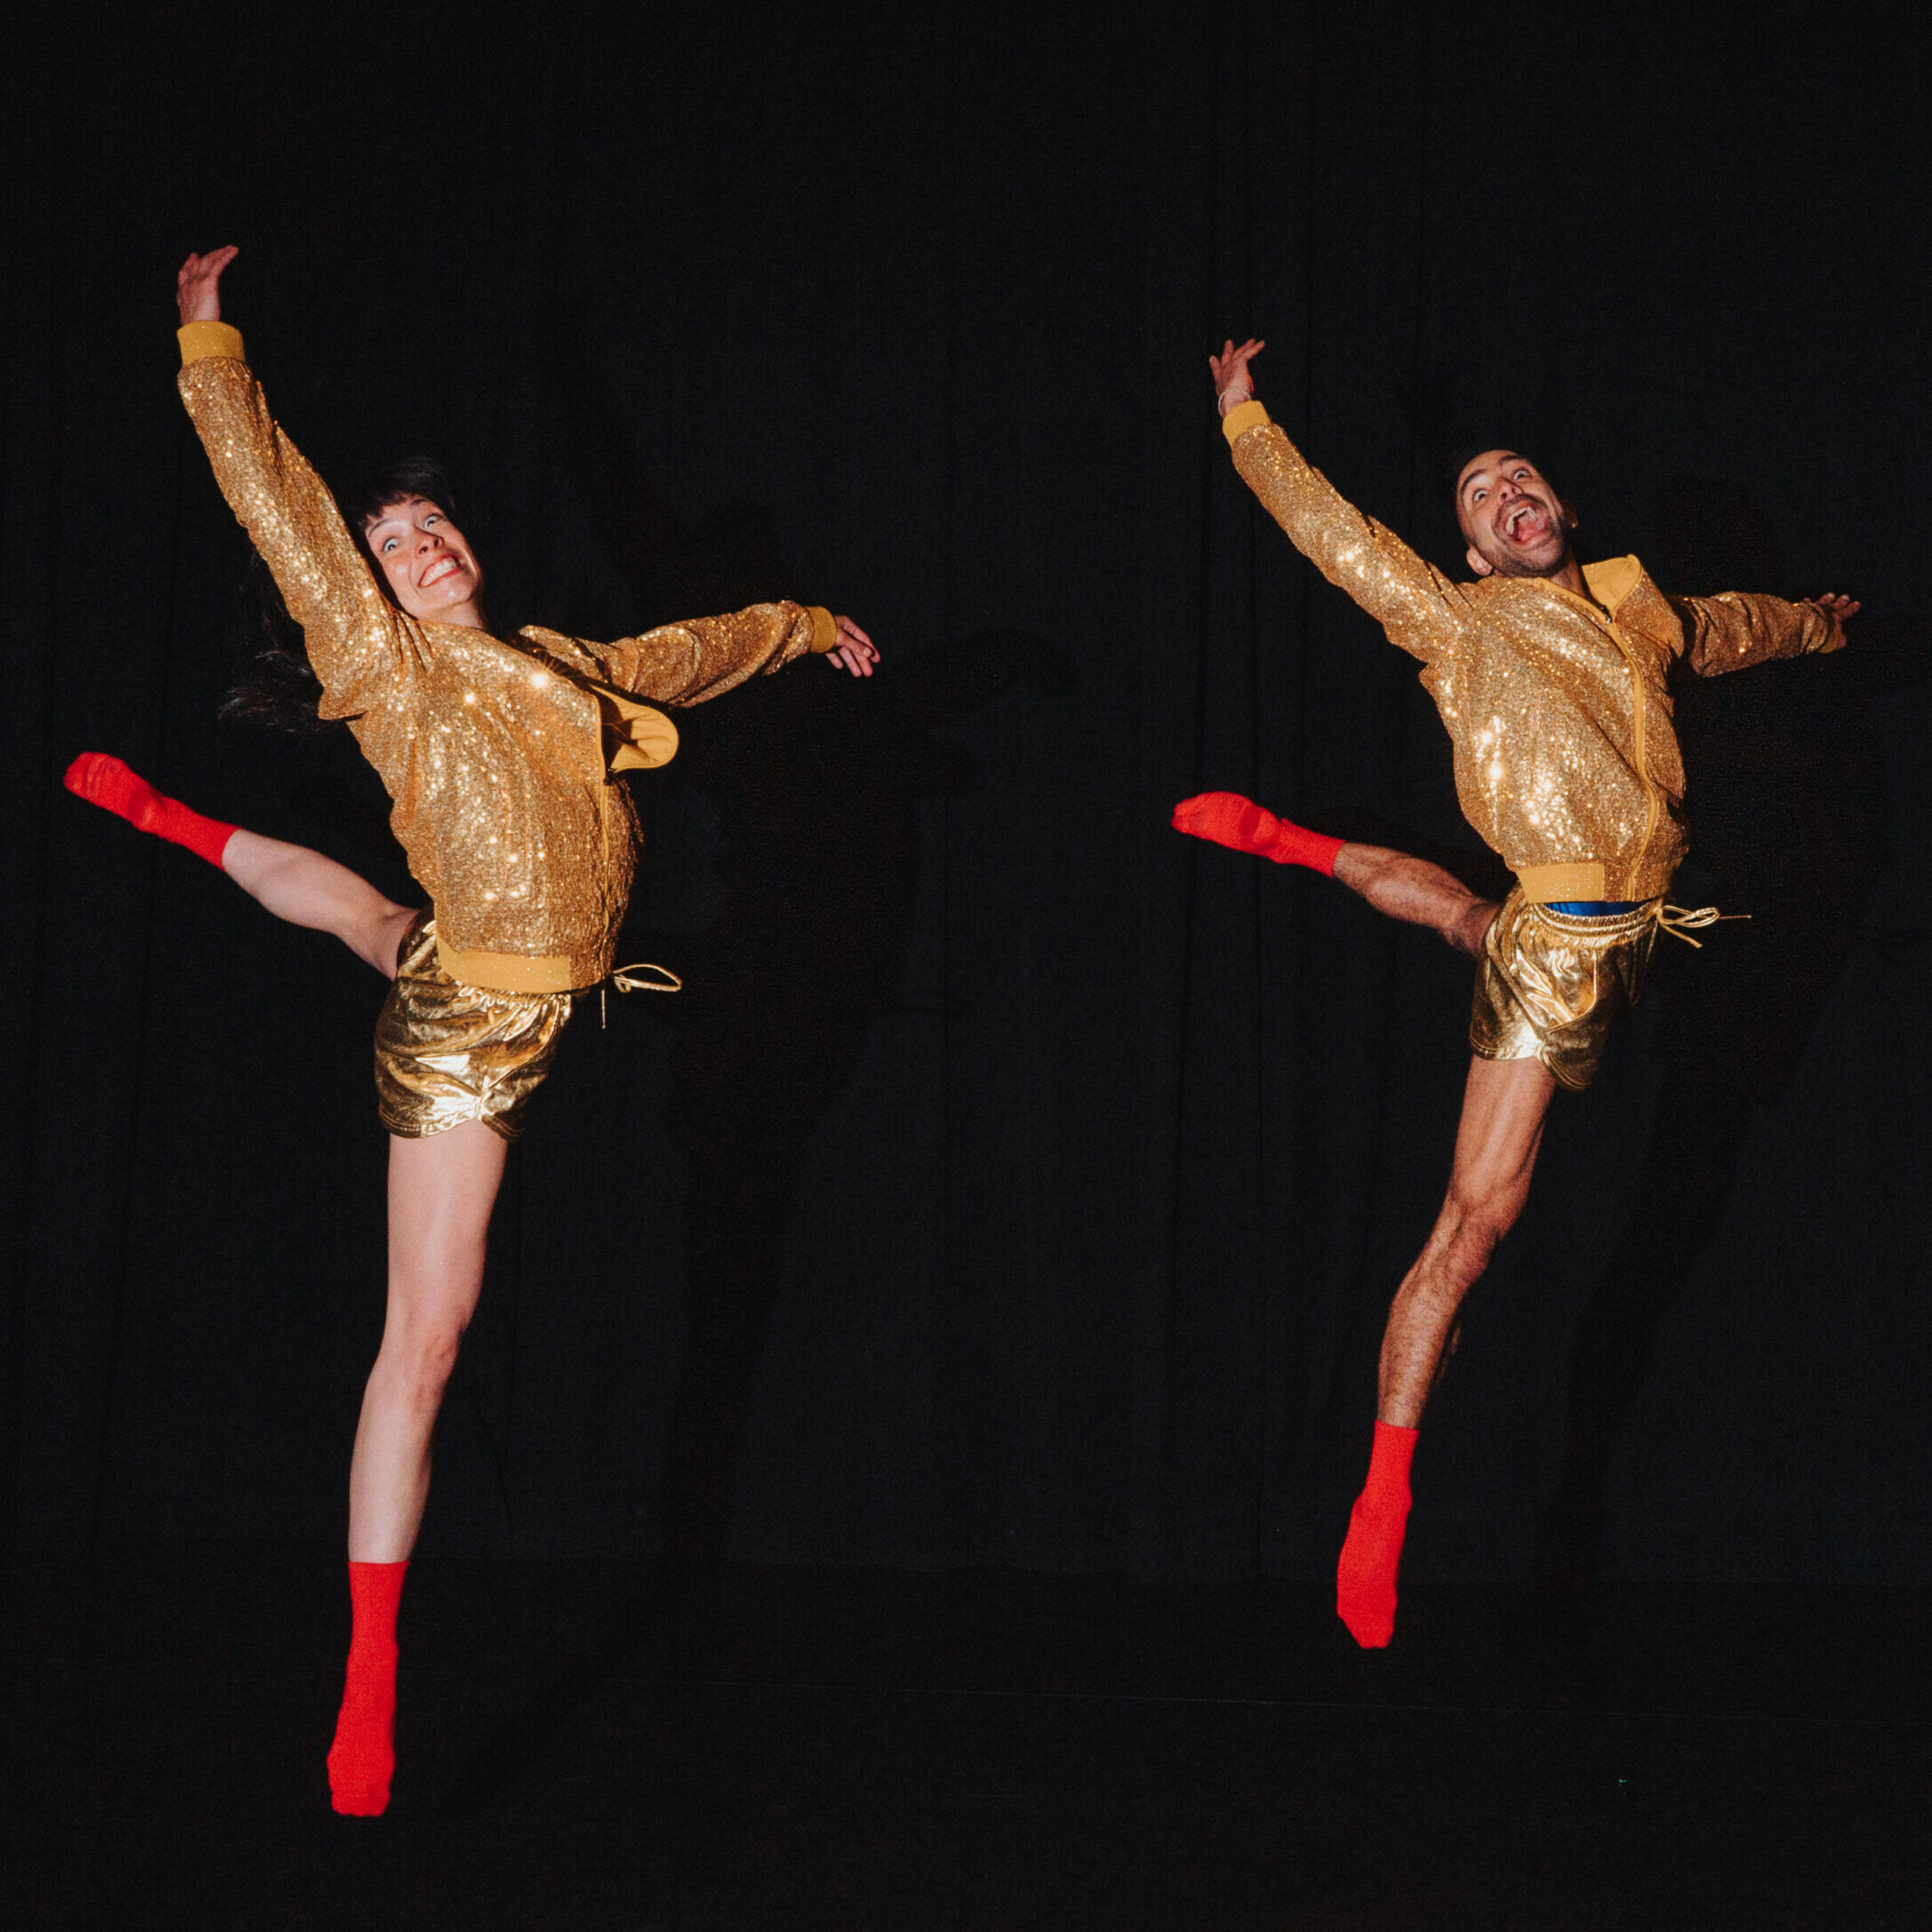 Against a black background, two dancers side by side wearing gold sparkly jackets and shorts, bare legs and red socks, jump with one leg bent one arm up and their mouths open and eyes wide